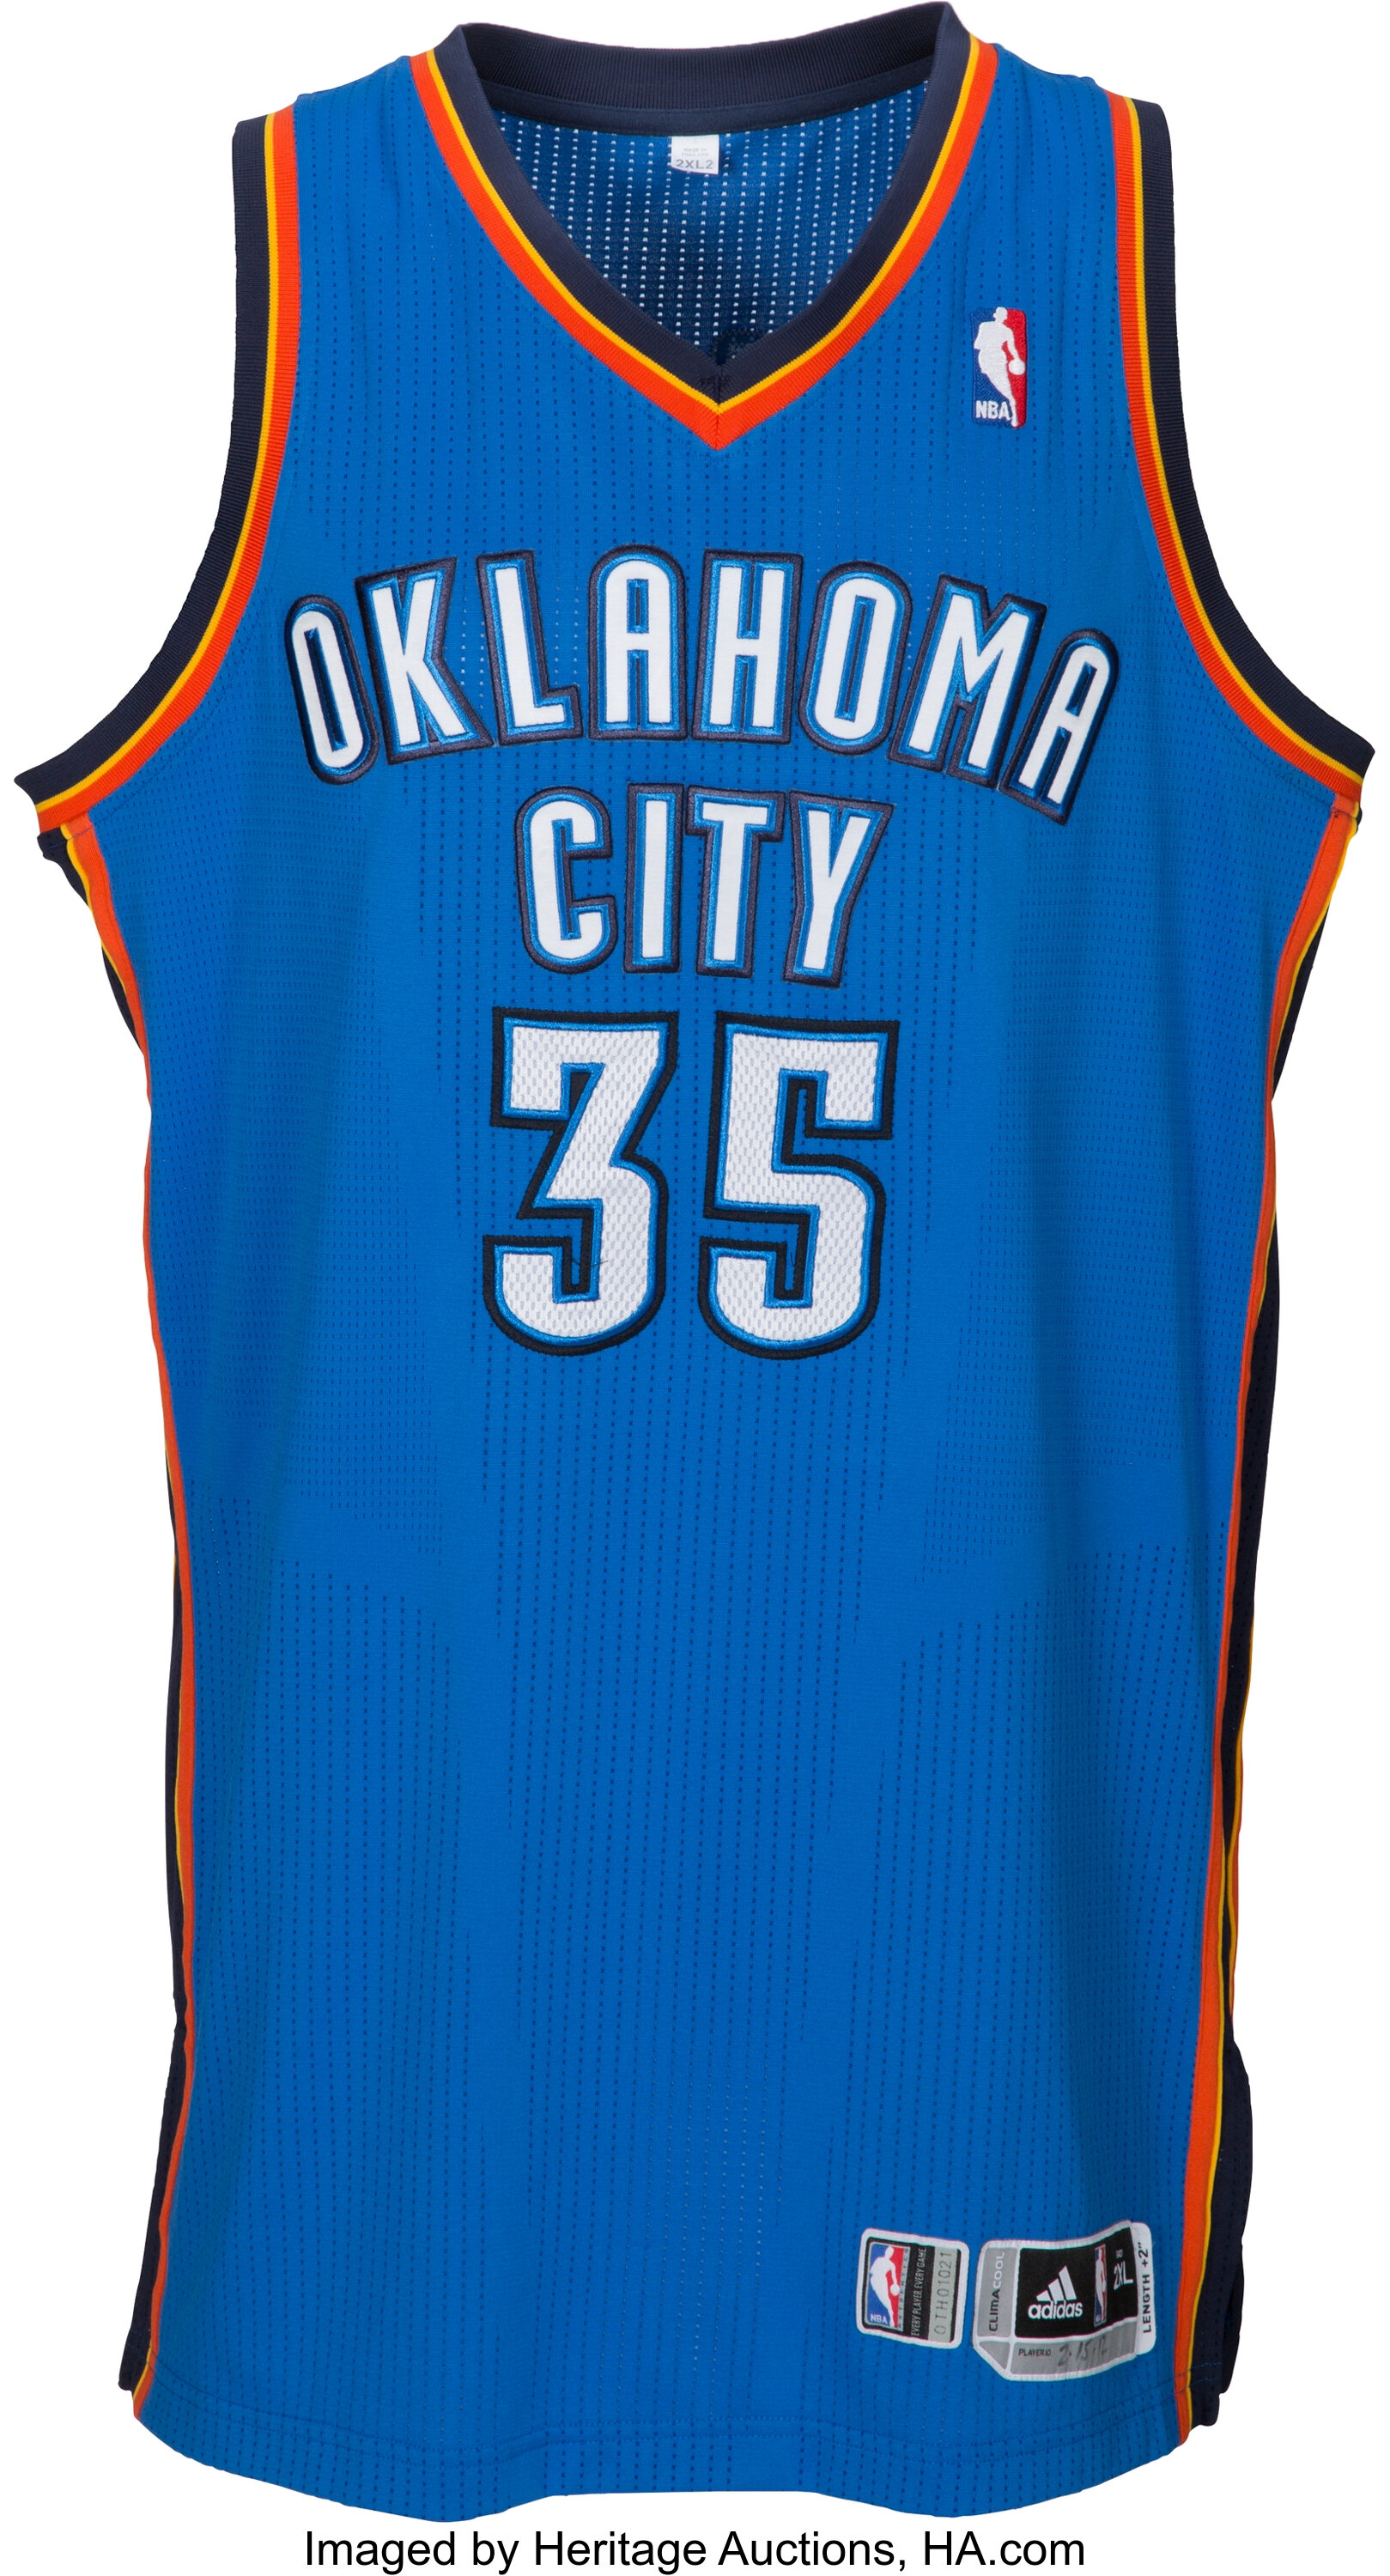 2011 12 Kevin Durant Game Worn Oklahoma City Thunder Jersey Photo Lot 50719 Heritage Auctions